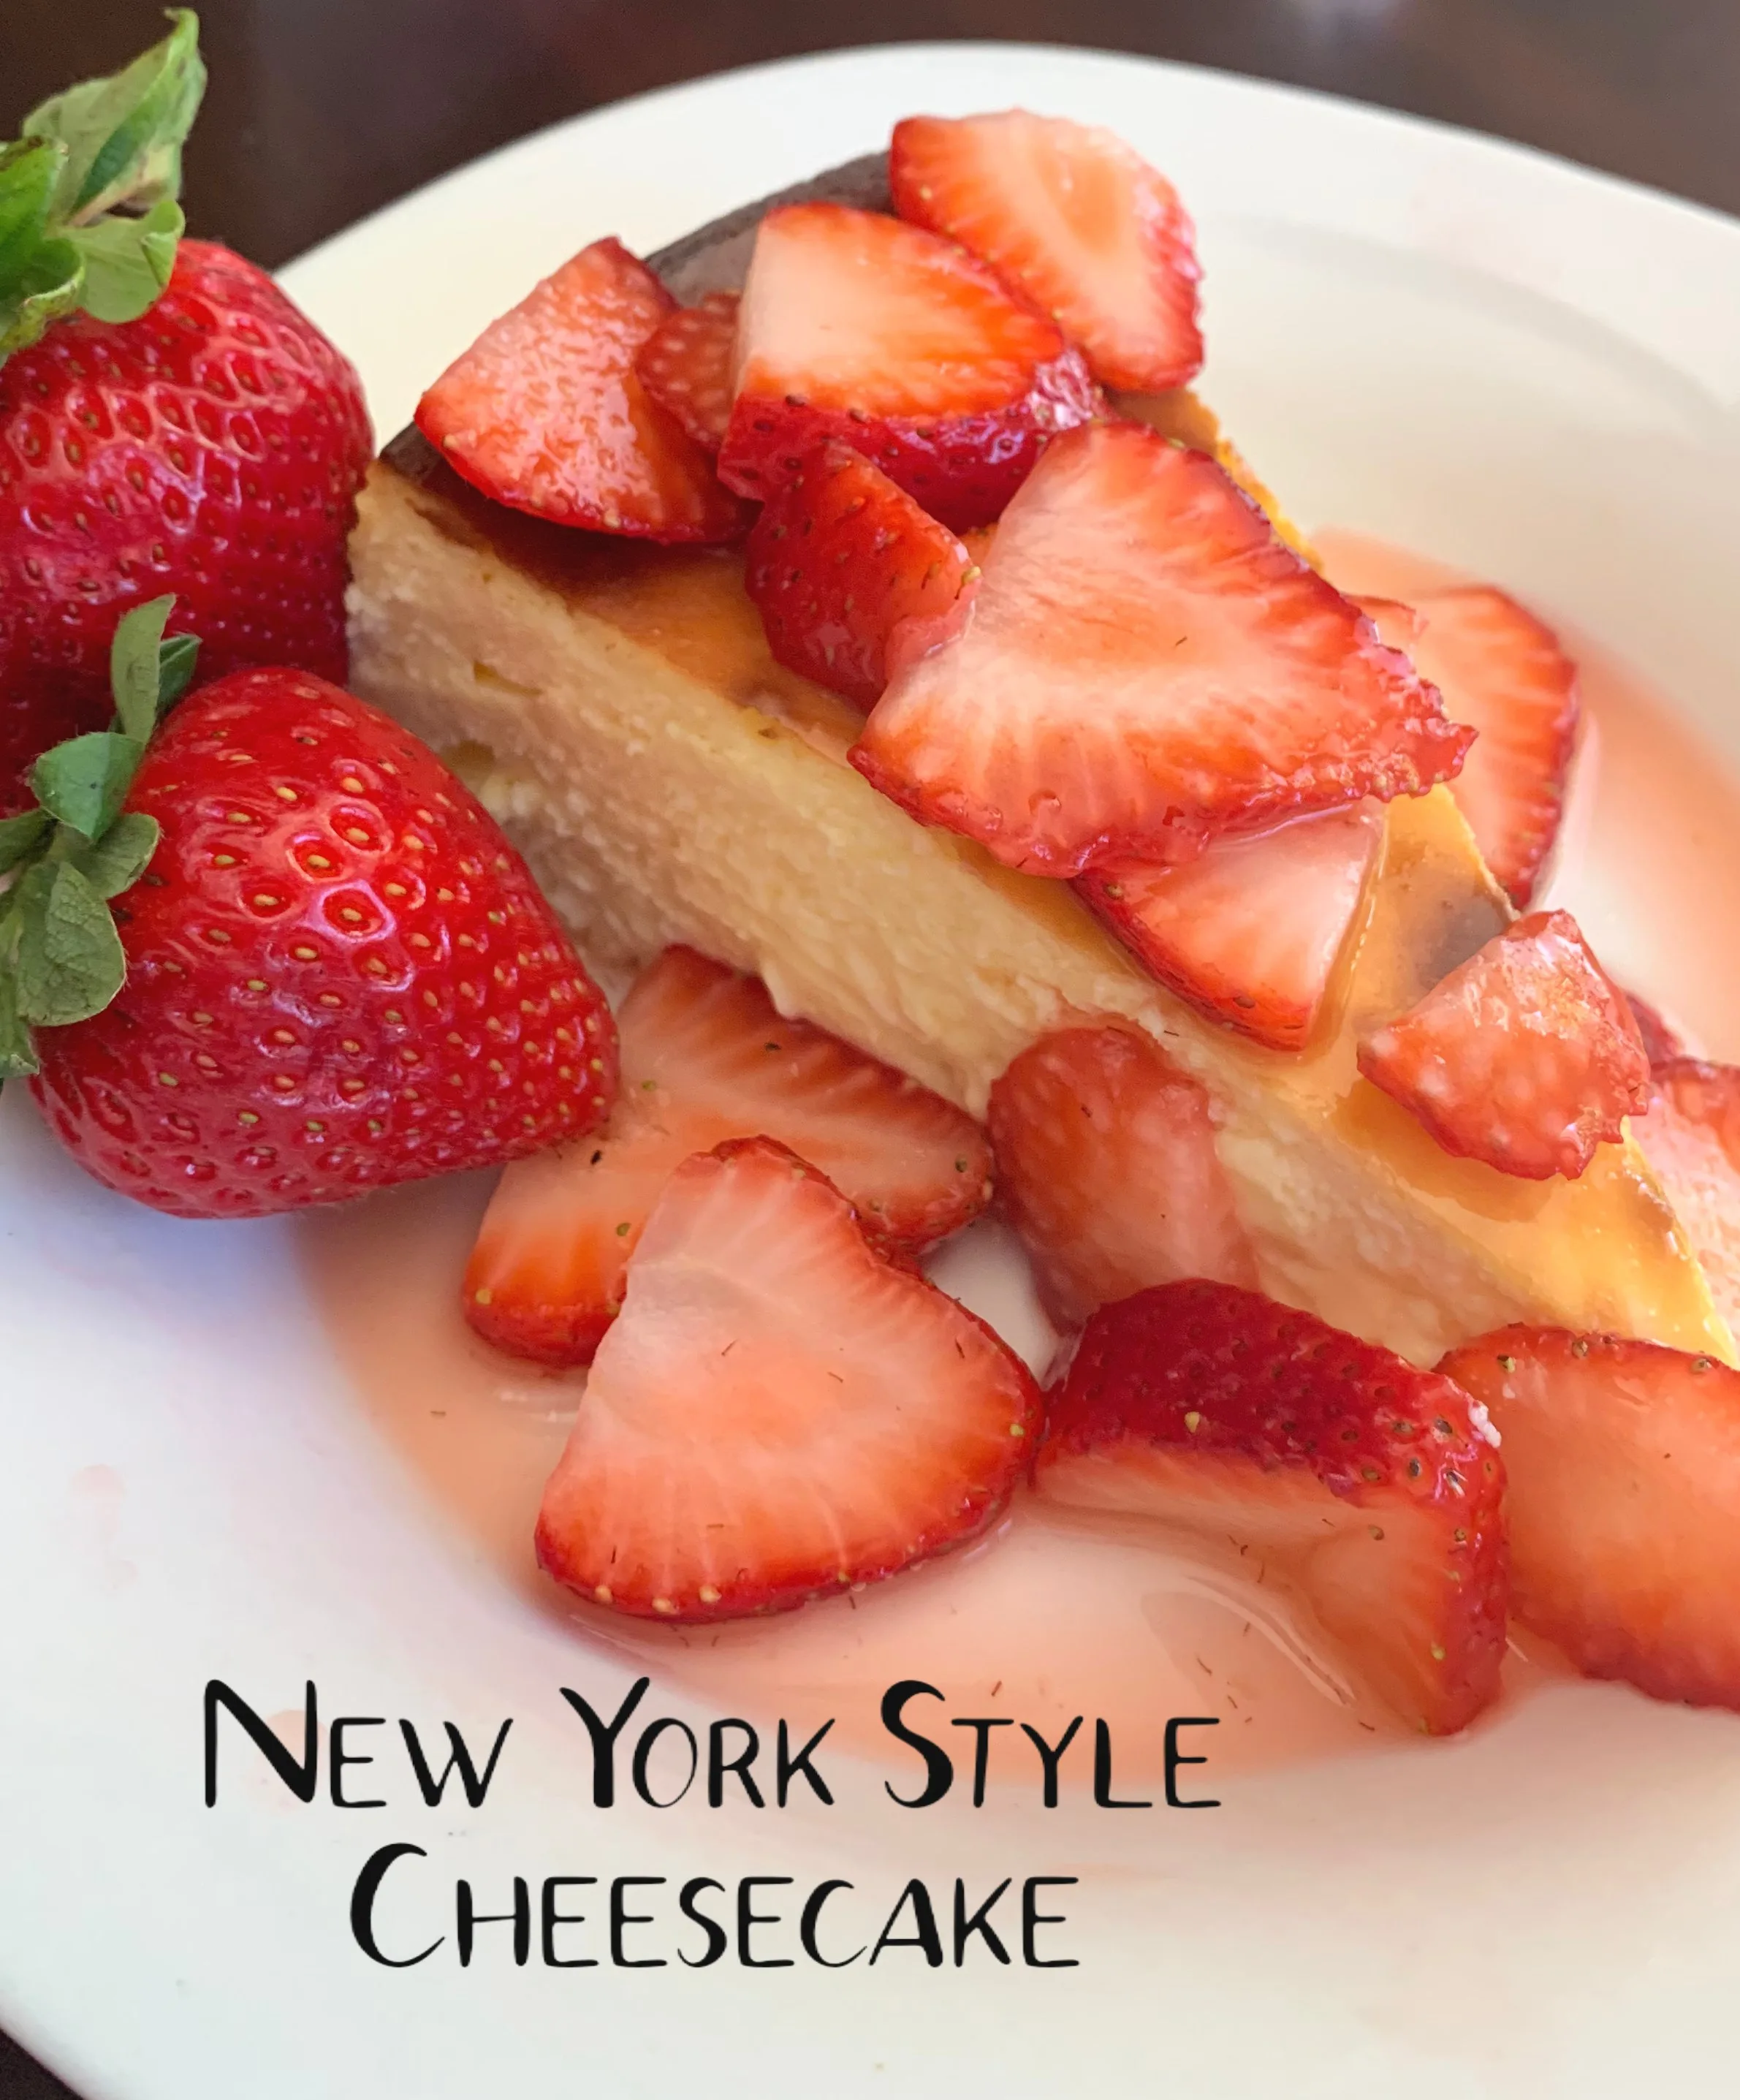 New York Style Cheesecake with strawberries with strawberries recipe